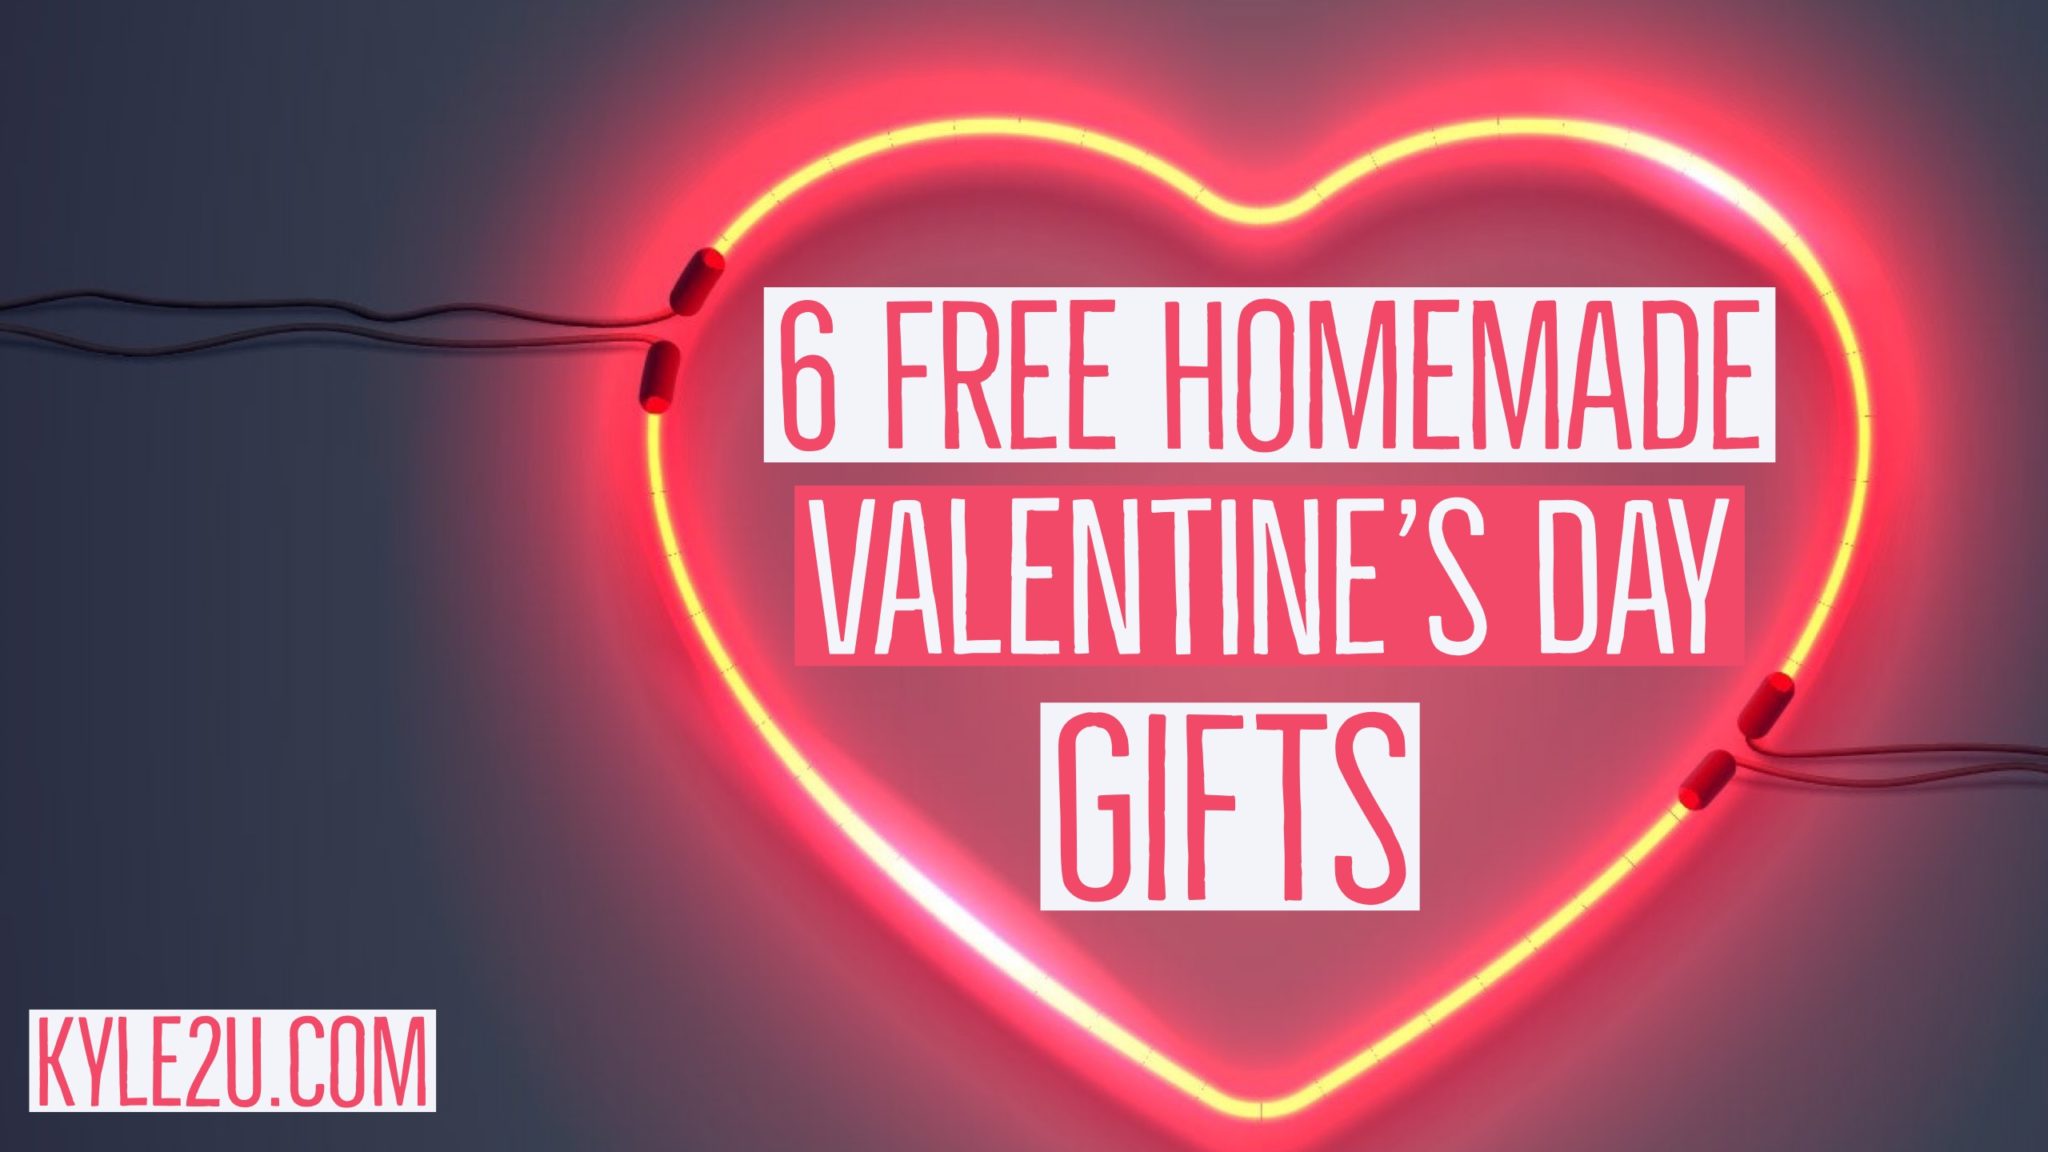 6 free homemade Valentine's gifts they'll love this February 14th